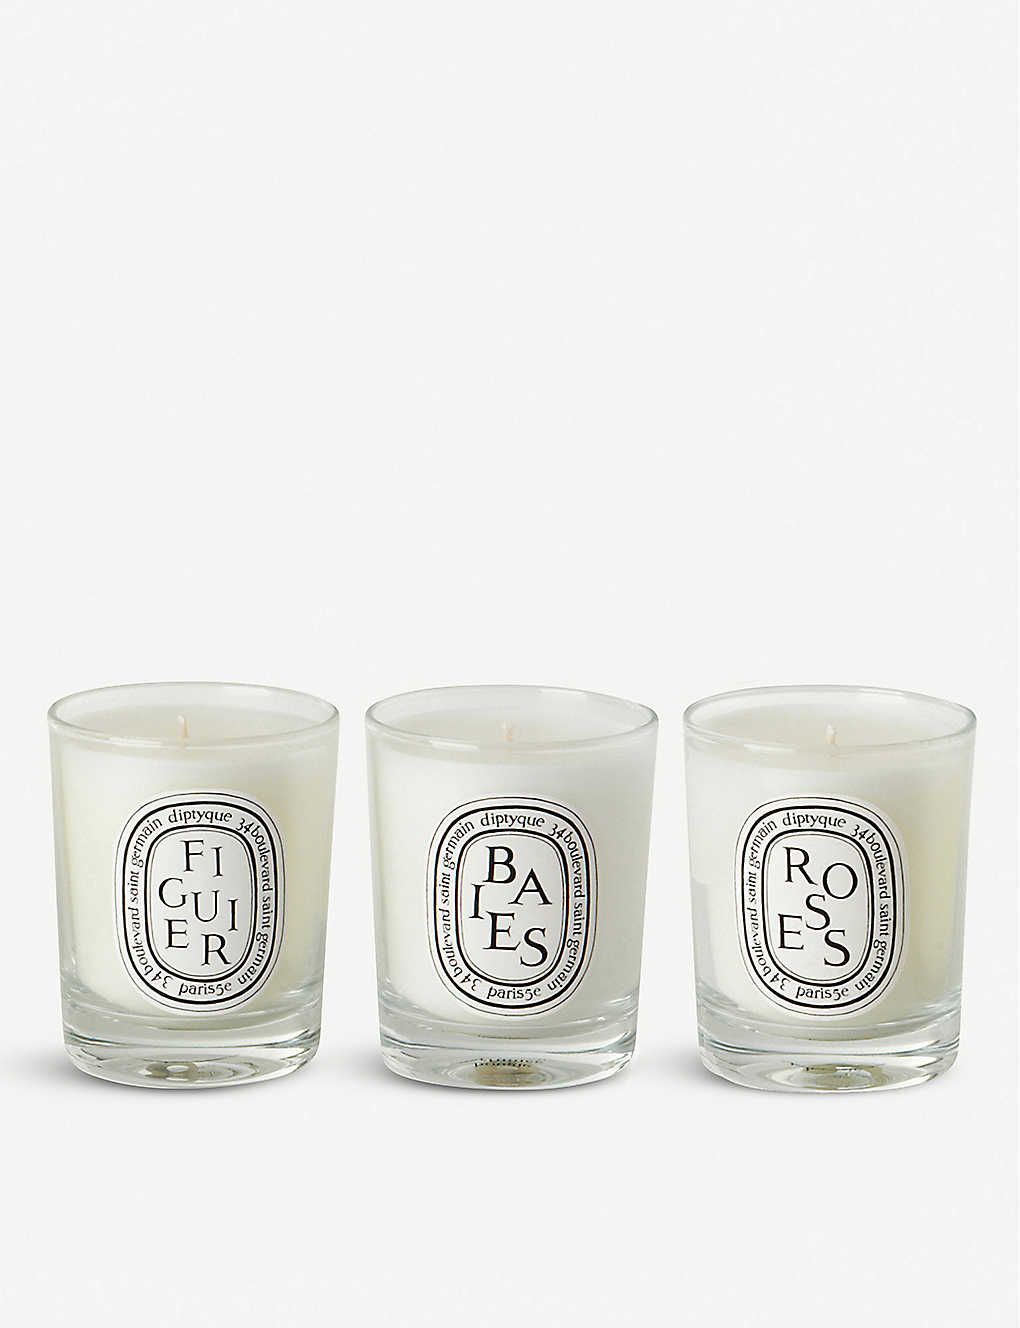 Baies, Figuier and Roses mini candles 3 x 70g | Selfridges